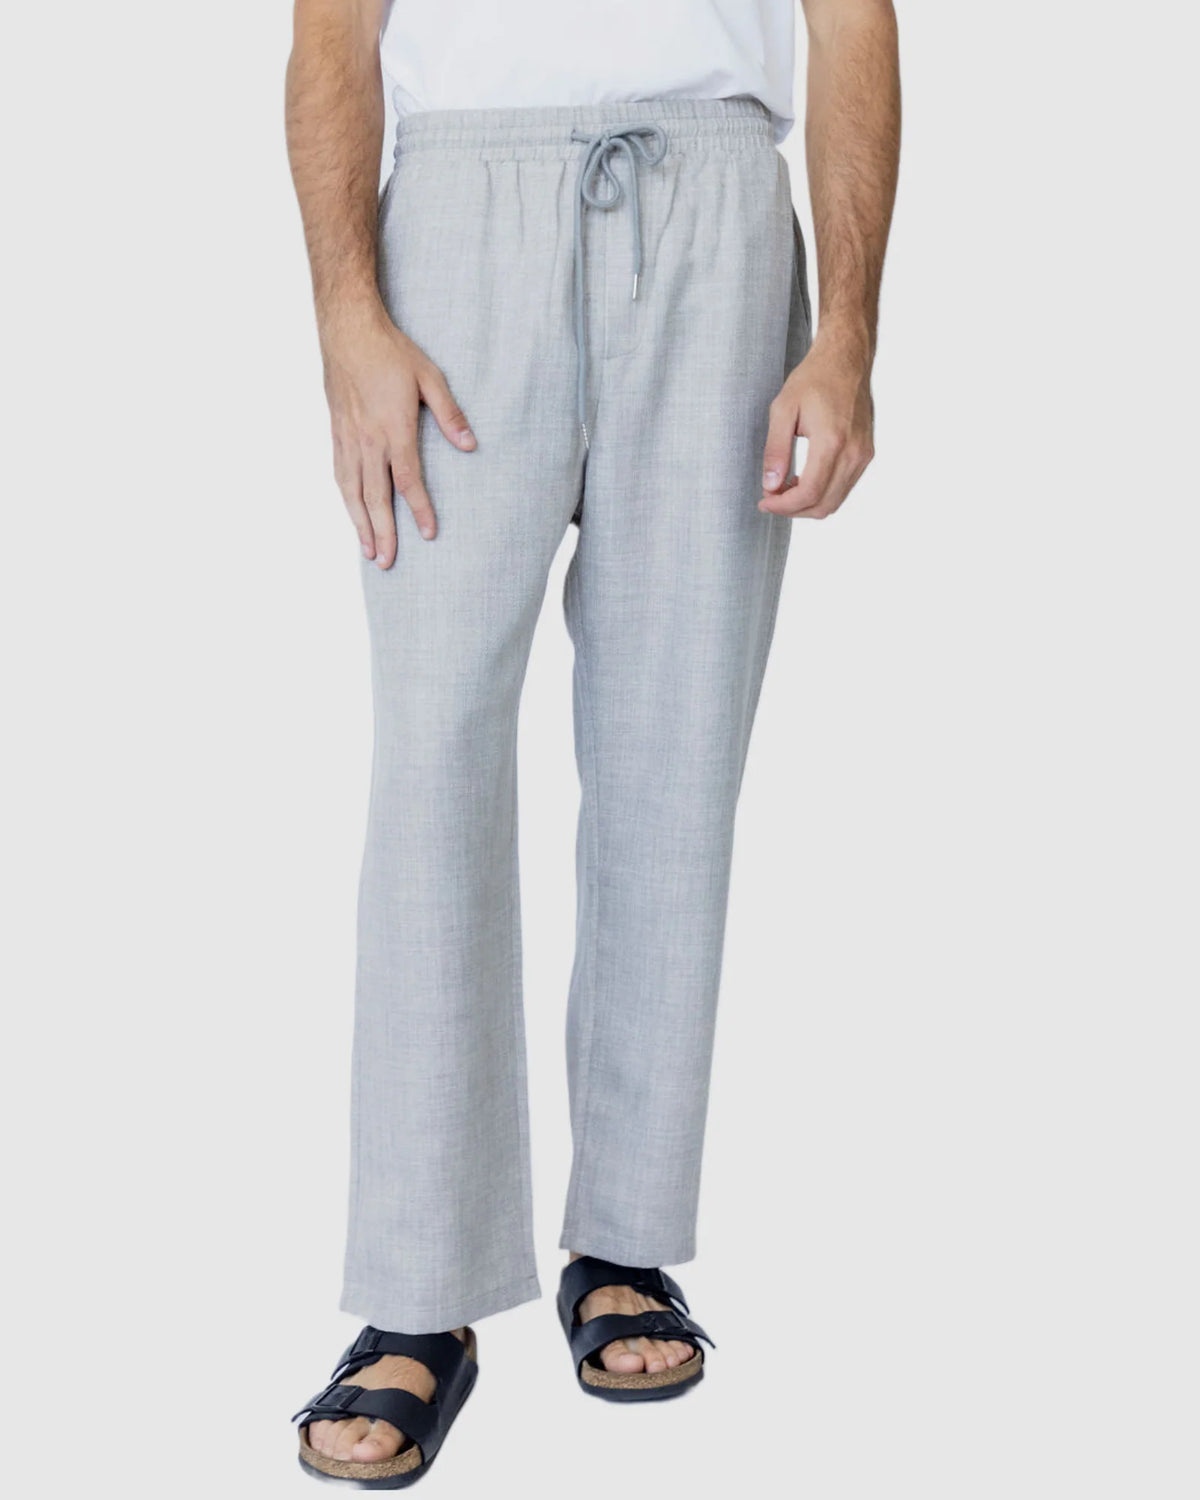 Justin Cassin Zachary Loose Tie Pants in Grey Color